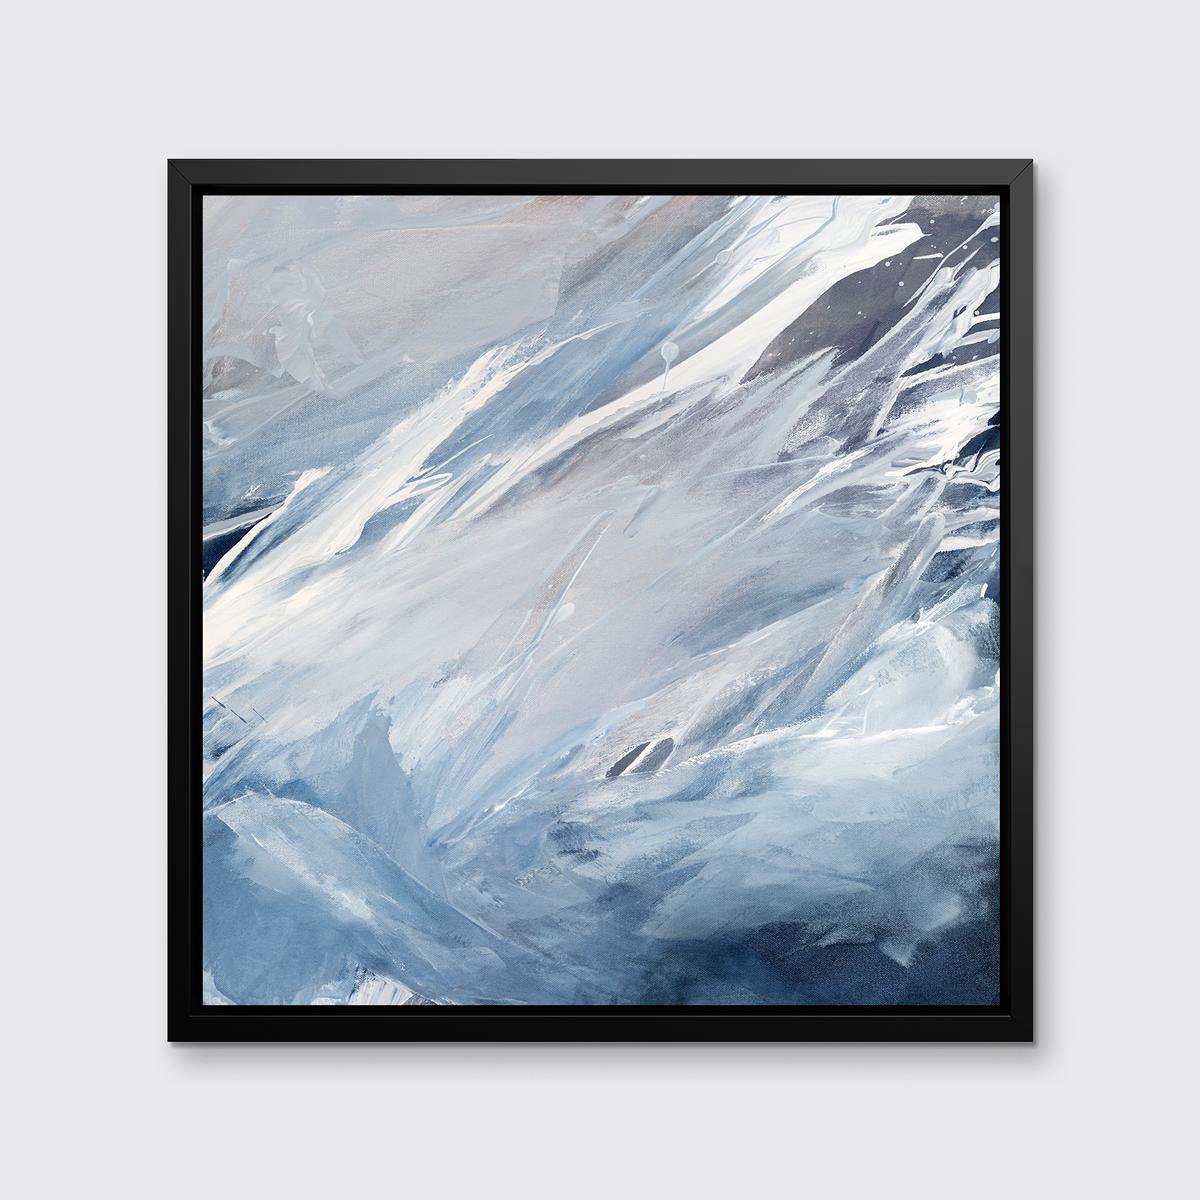 This contemporary limited edition print by Teodora Guererra features a light, cool palette, with varying shades of blue, grey, and muted violet applied in washes that blend together and create movement up toward the top right-hand corner of the